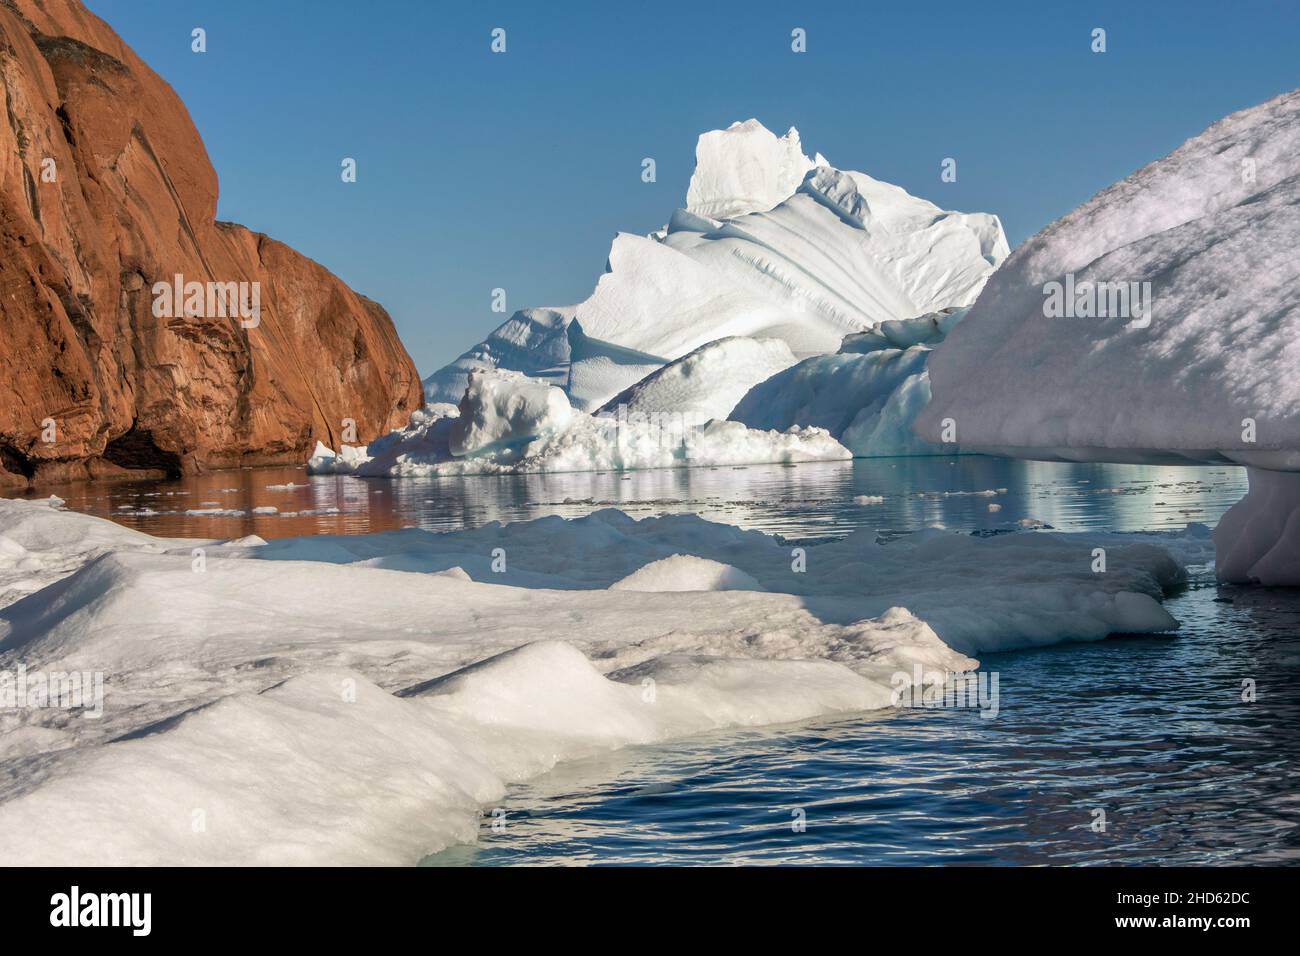 Icebergs piled up in the strait between Rode O and Milne Land, Rodefjord, Scoresby Sund, Greenland Stock Photo